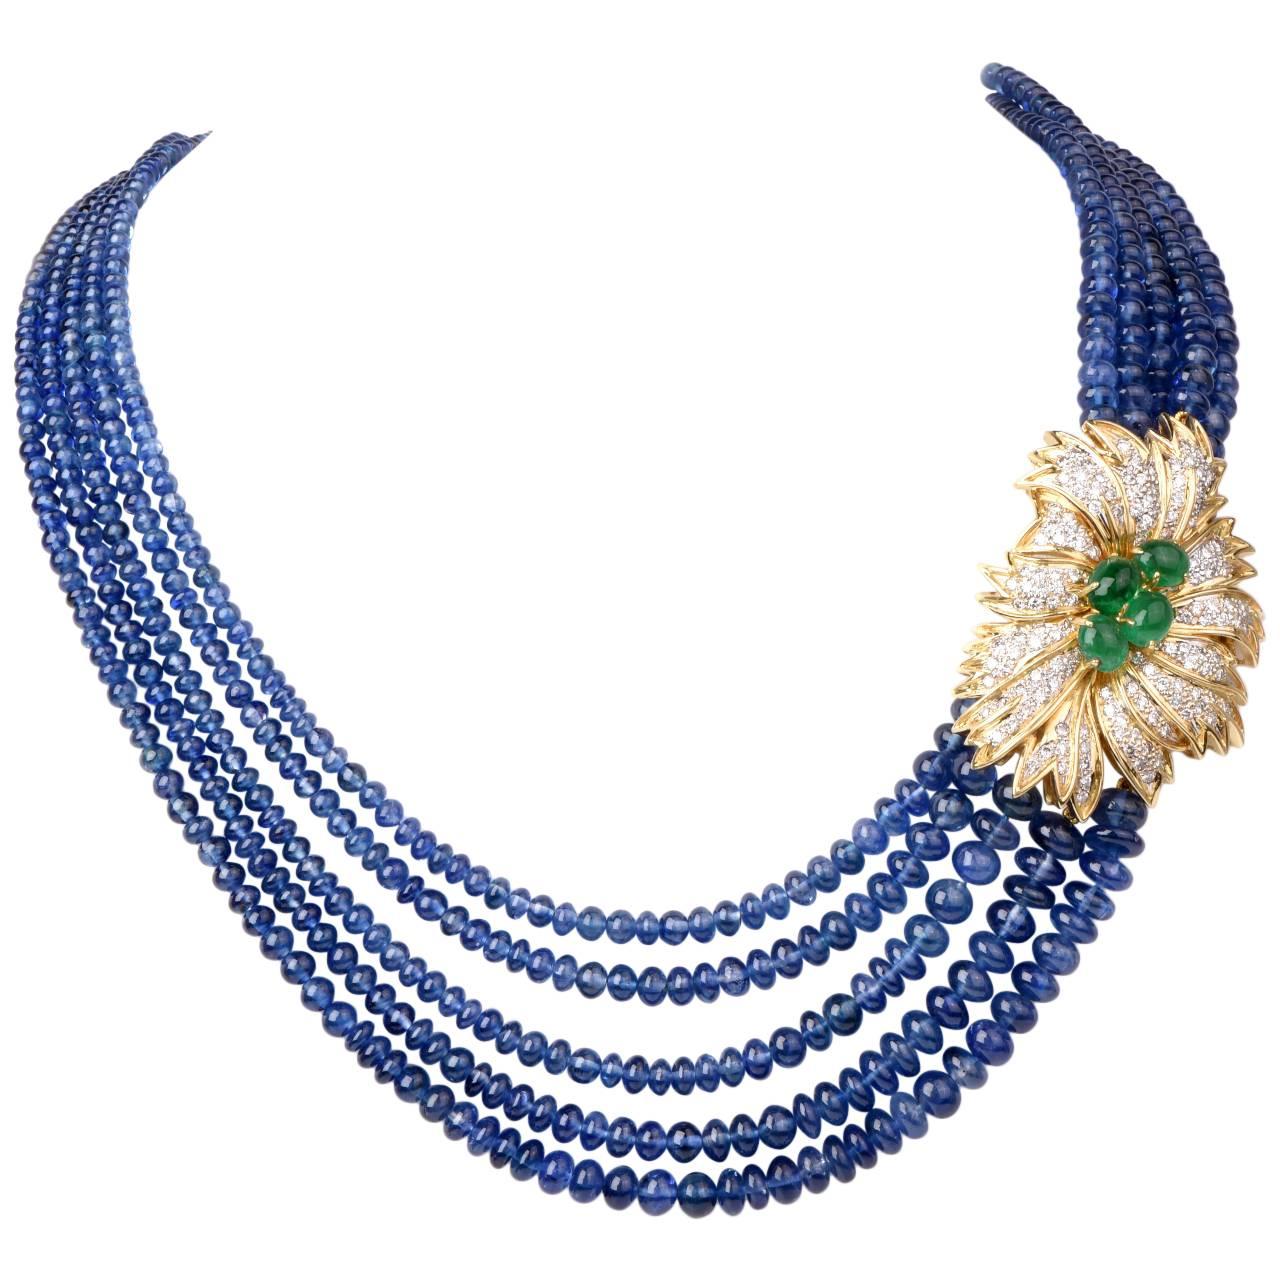 Brilliant Sapphire Beaded Necklace with Emerald Diamond Gold Floral Motif Clasp